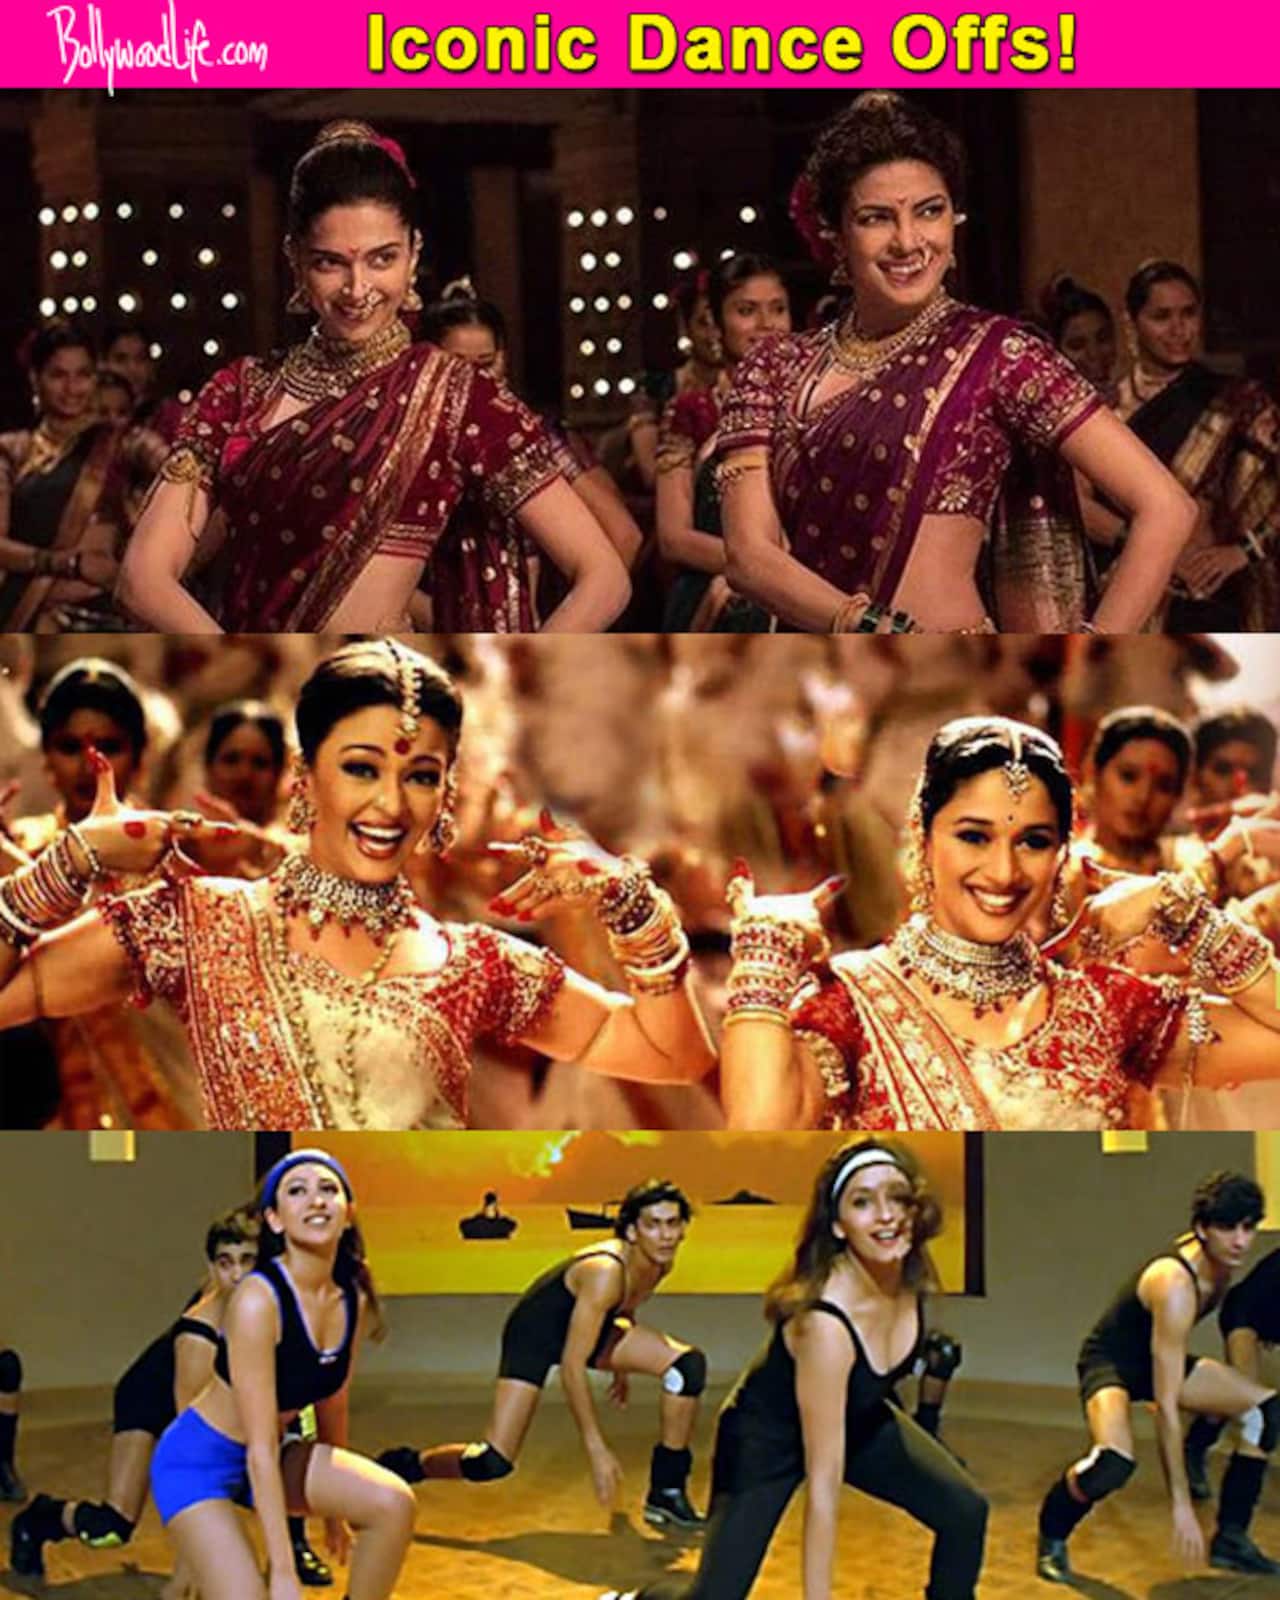 Bajirao Mastani's Pinga, Devdas' Dola Re Dola, Dil Toh Pagal Hai's Dance of Envy - check out the iconic dance battles in Bollywood!